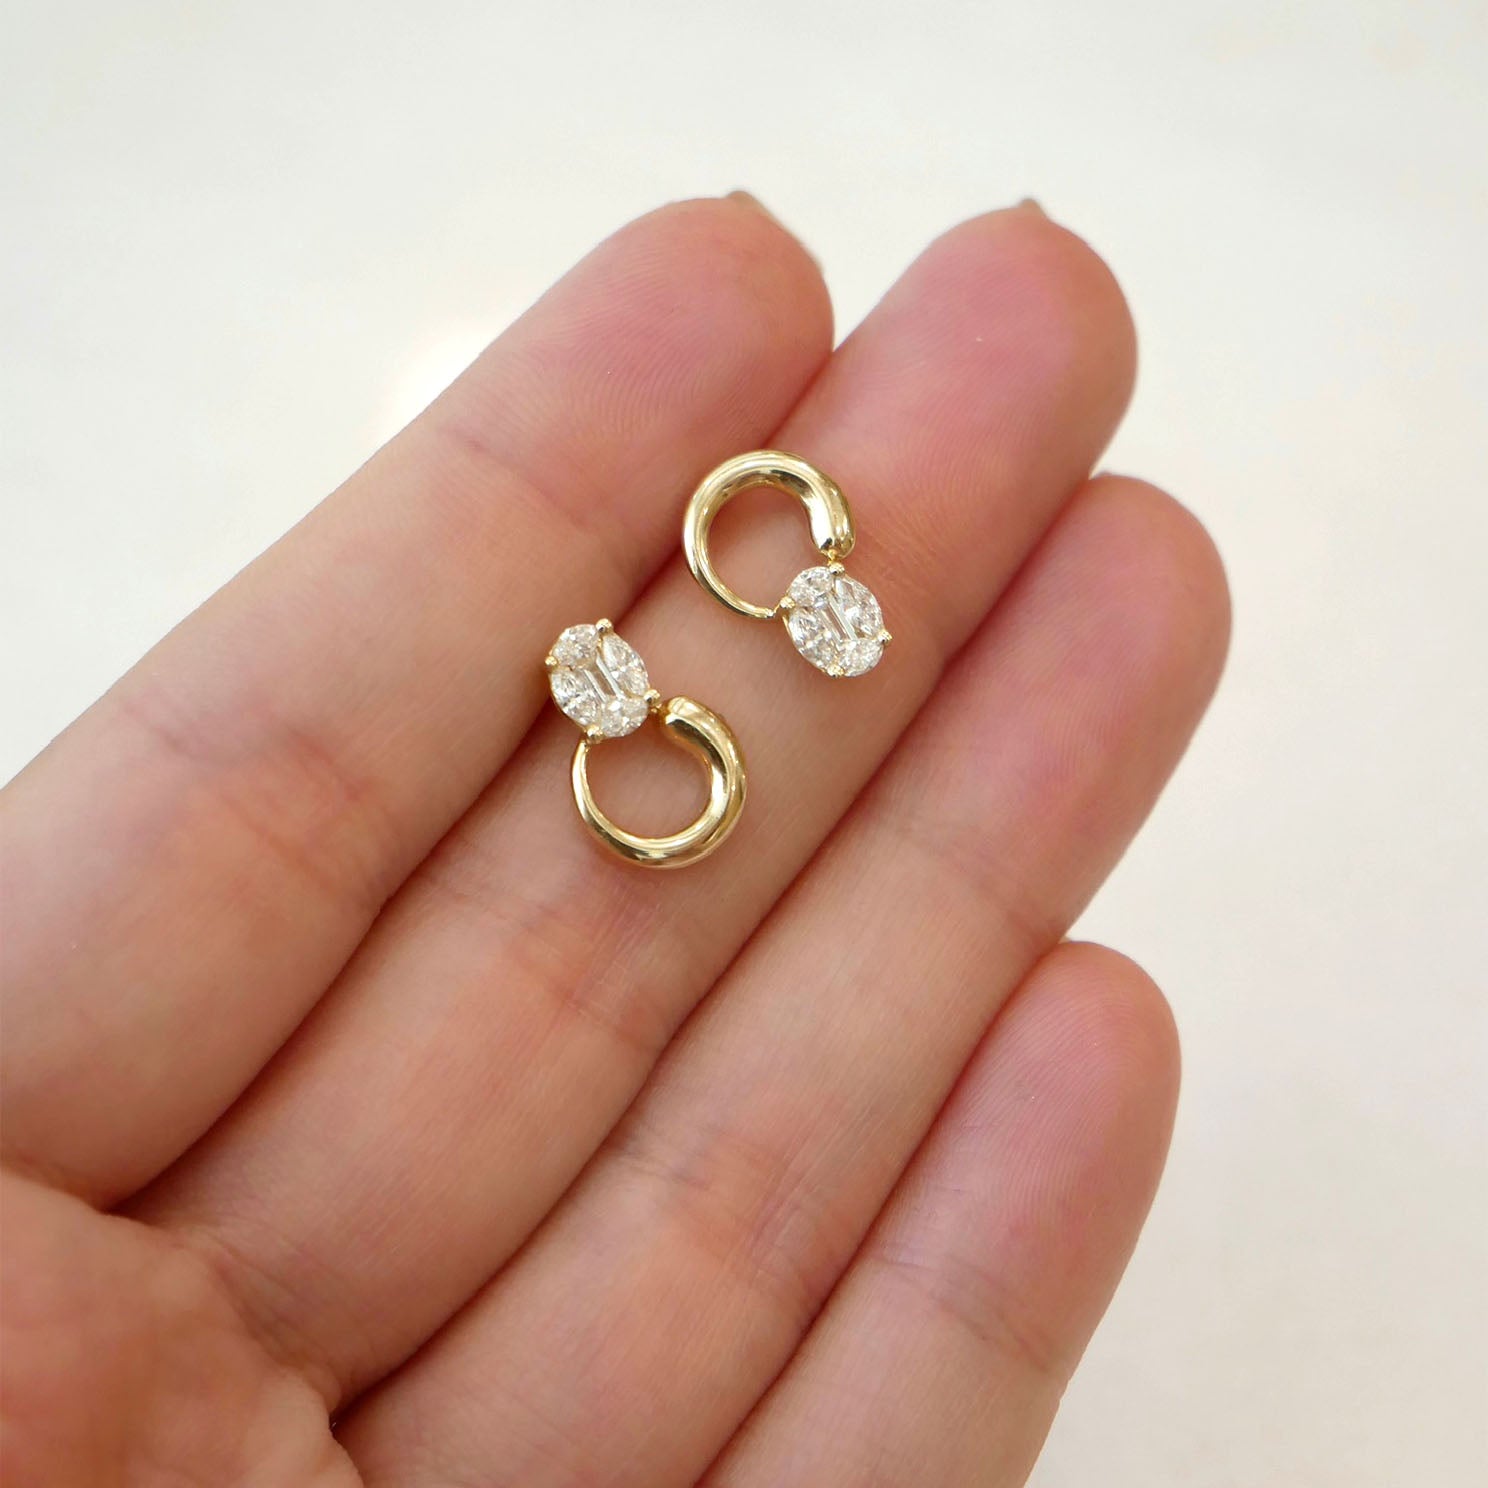 The Iris Illusion Stud Earrings in 14k yellow gold held in hand of model